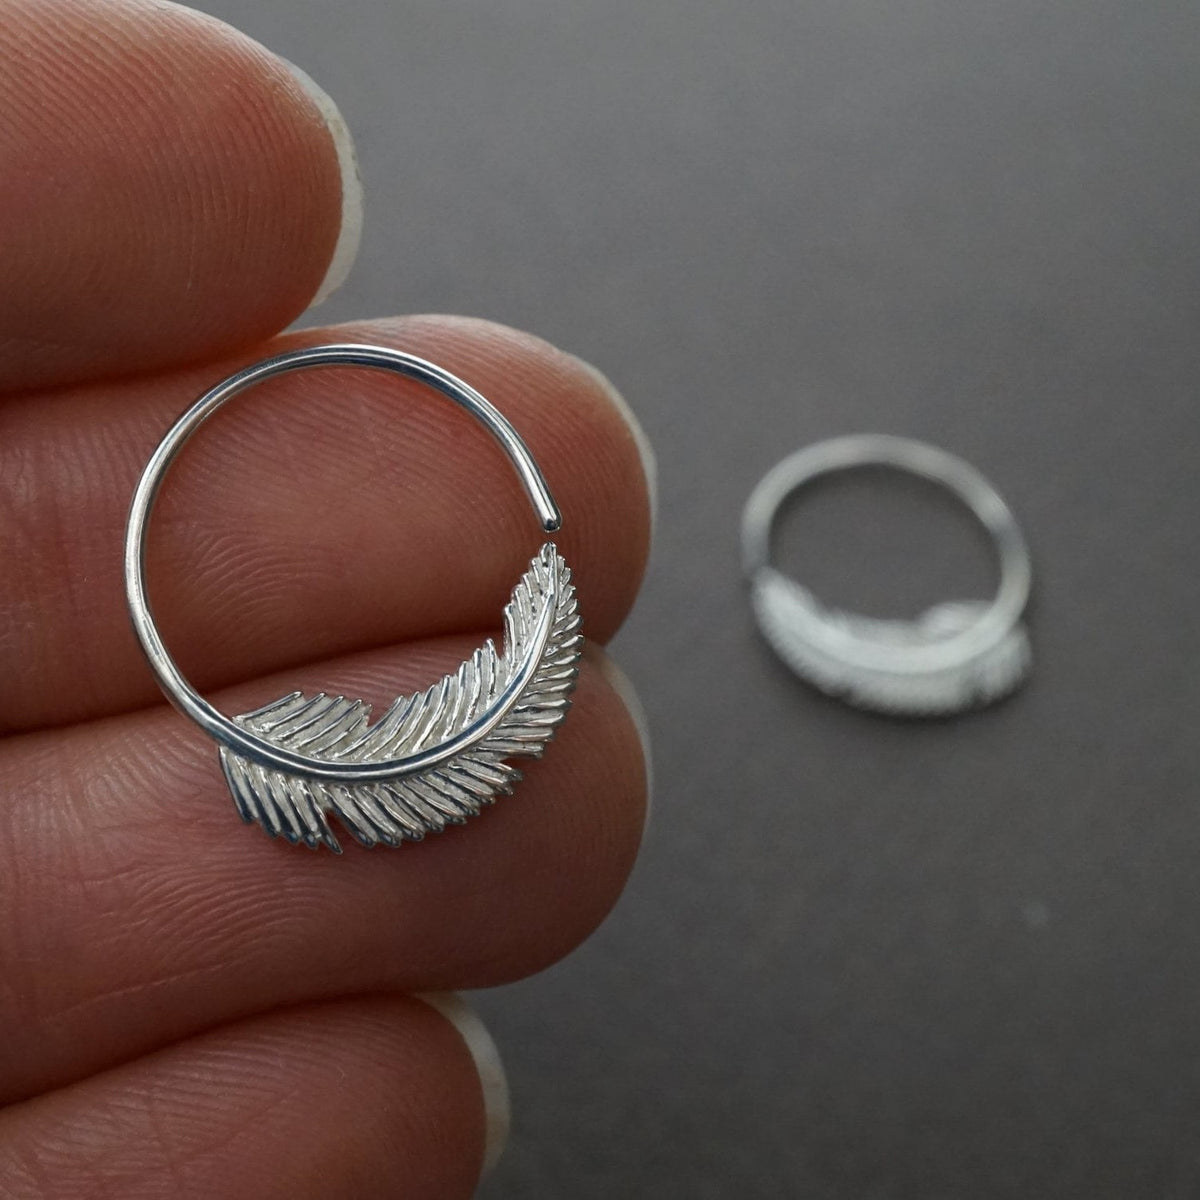 Tiny Silver Feather Hoop Earrings 14mm - Nature Jewelry - cartilage, tragus, helix daith, piercing (264S)